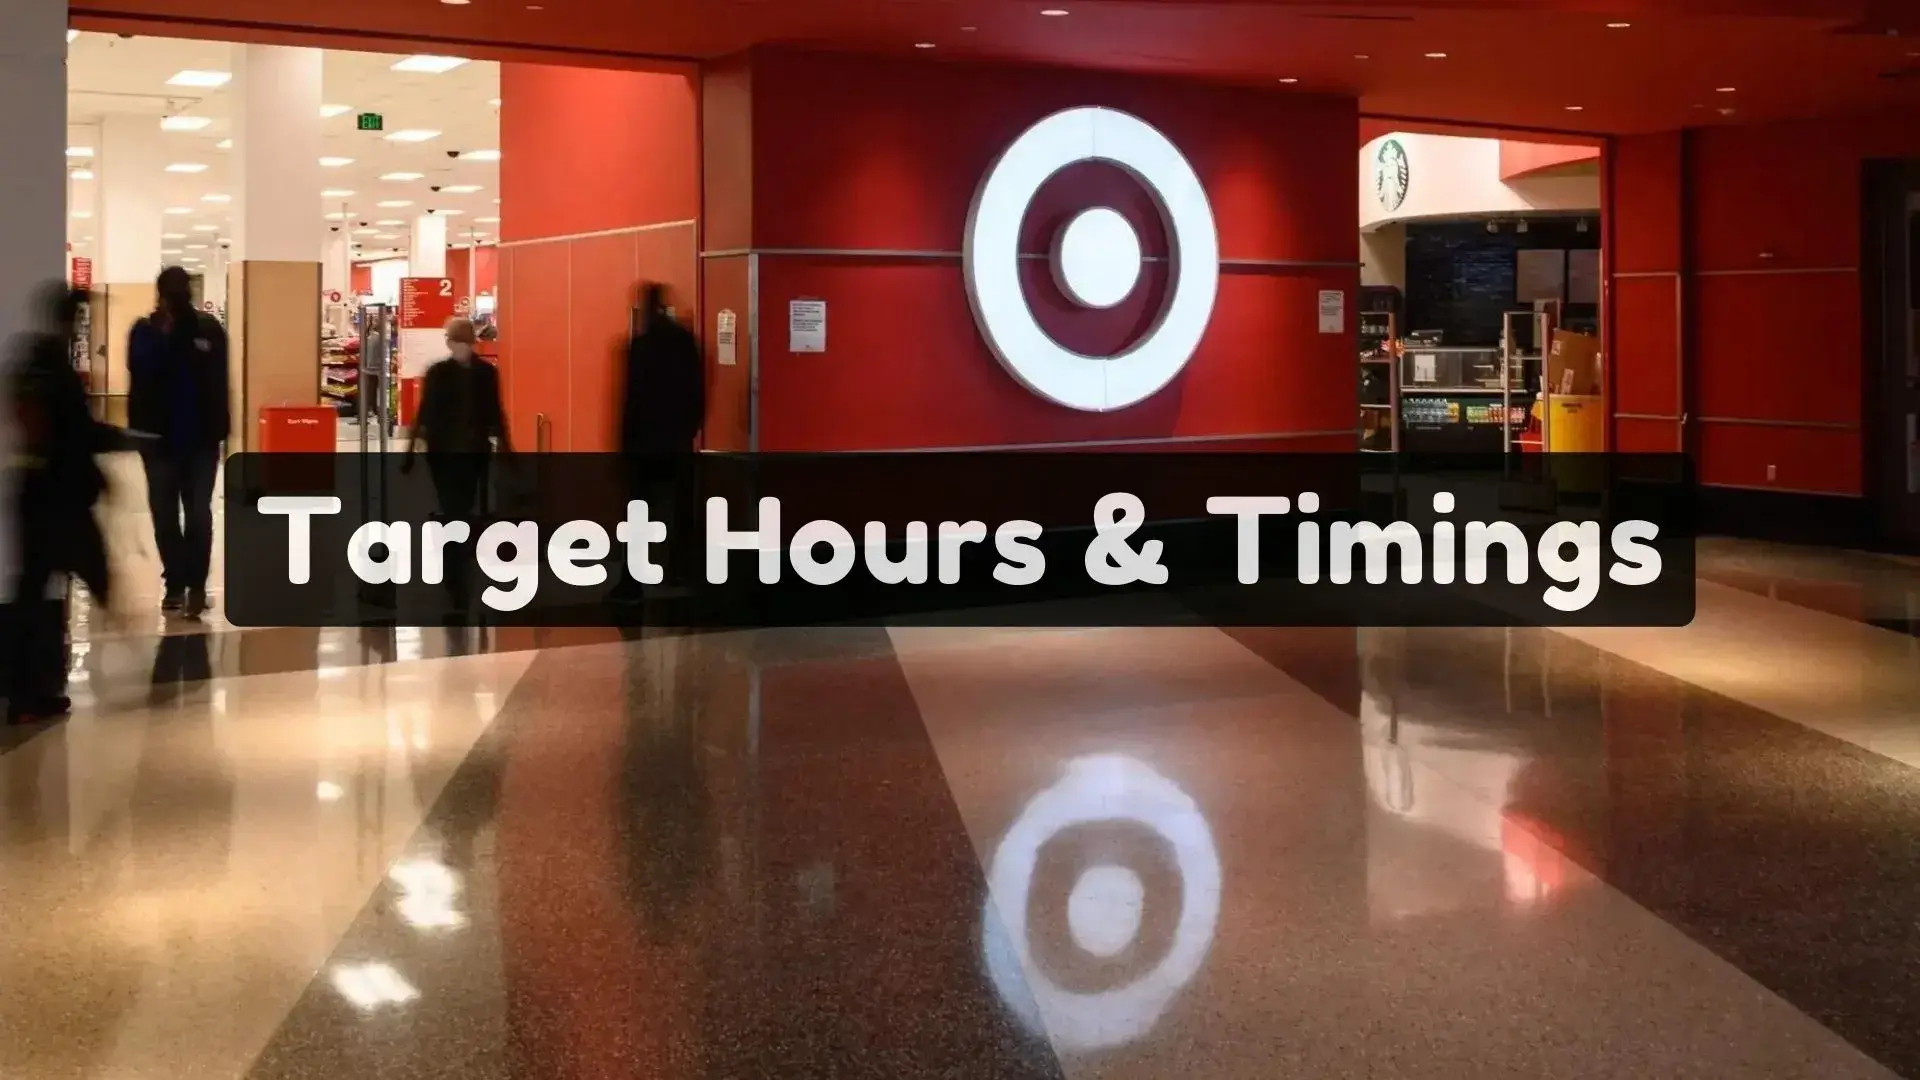 Are You Searching For Target Hours Near Me And Target Holiday Hours | Then Read This Ultimate Guide To Understand What Time Does Target Open And Close Today.